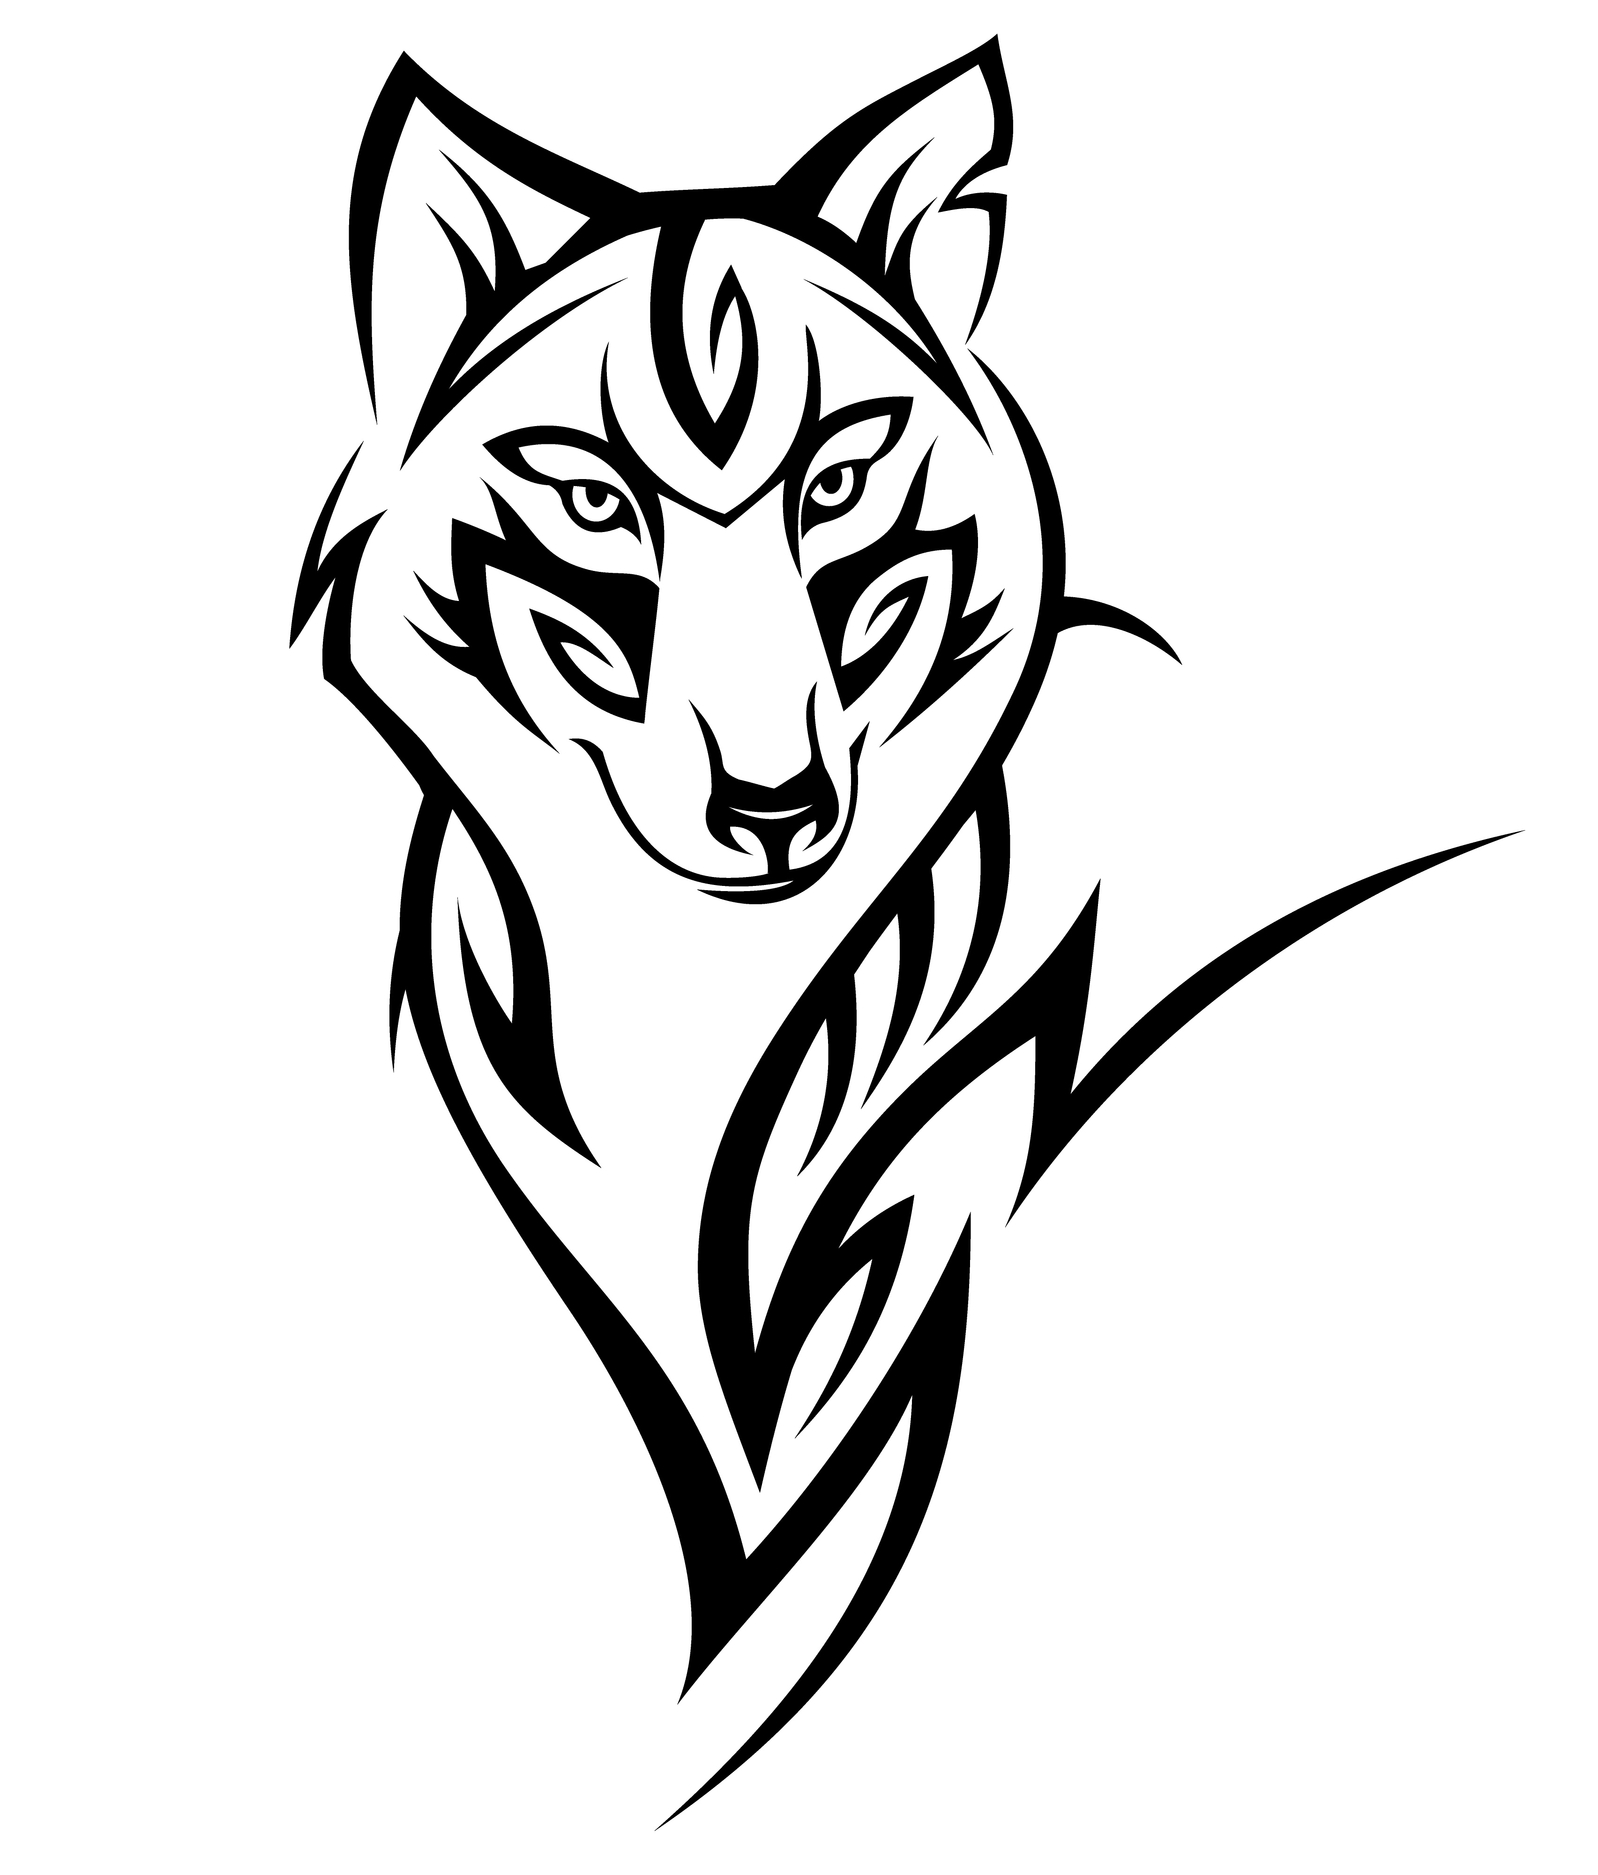 Wolf Tattoo Meaning - Tattoos With Meaning